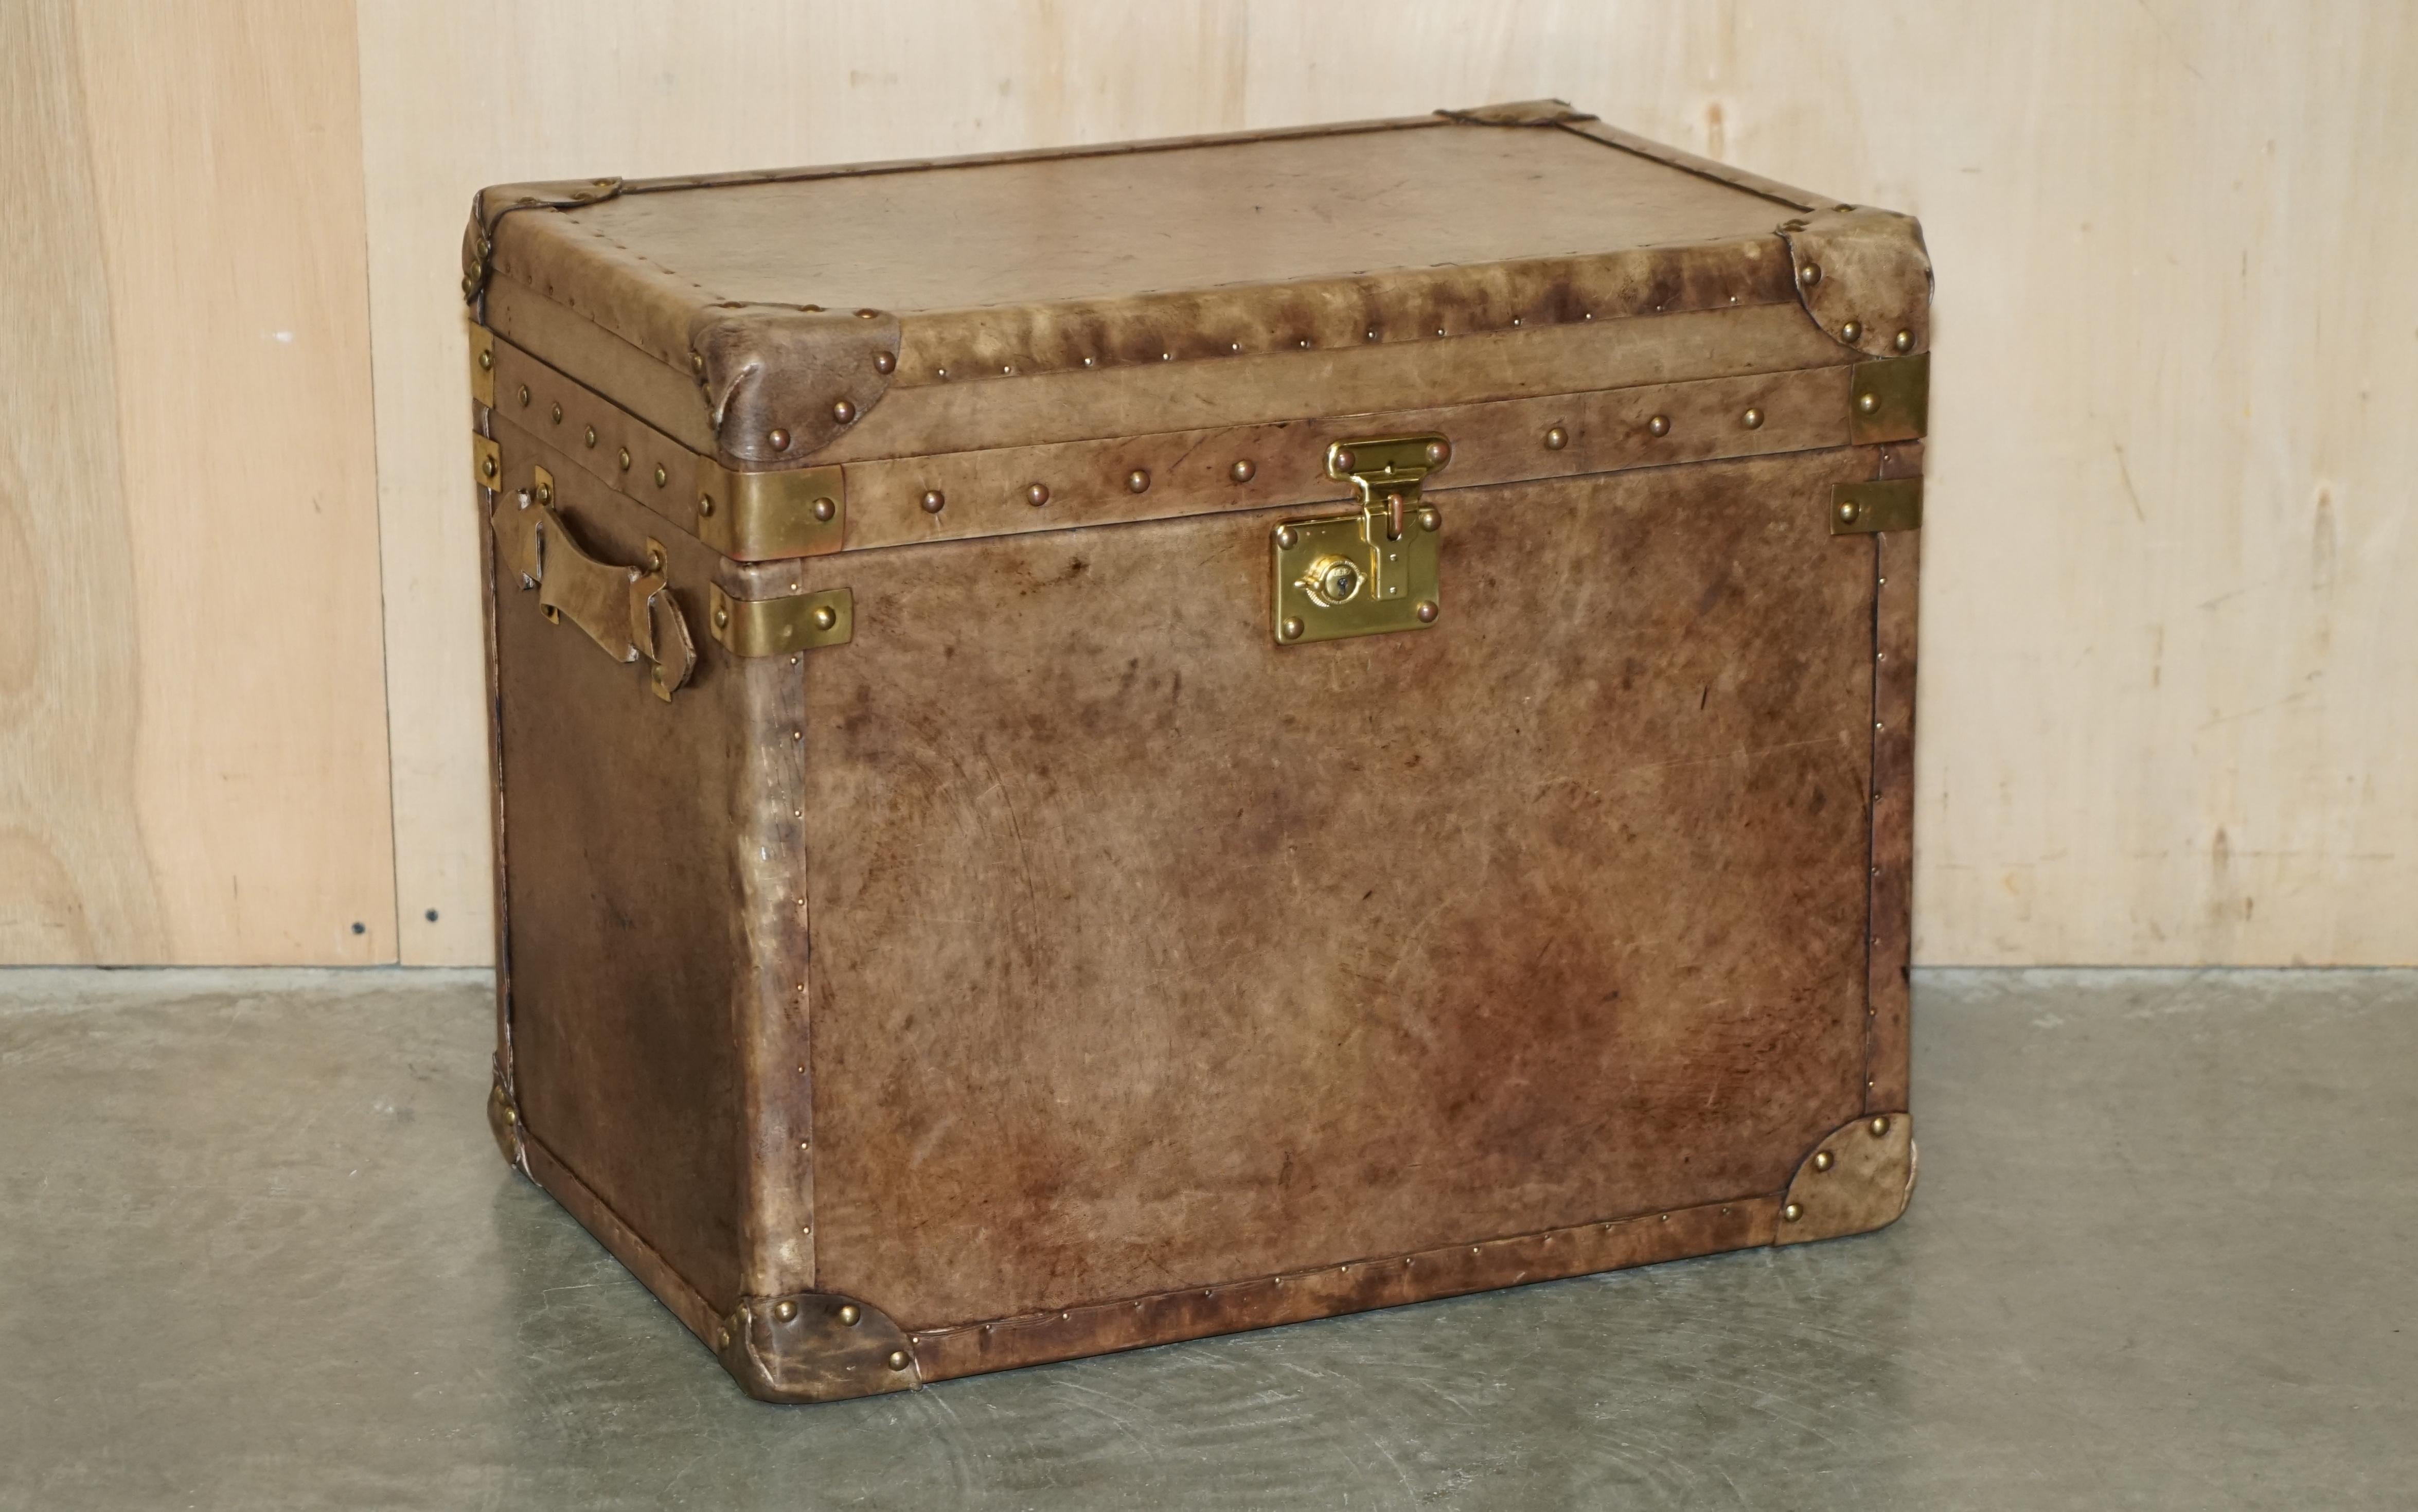 Royal House Antiques

Royal House Antiques is delighted to offer for sale this lovely hand dyed aged brown leather vintage steamer storage trunk 

Please note the delivery fee listed is just a guide, it covers within the M25 only for the UK and